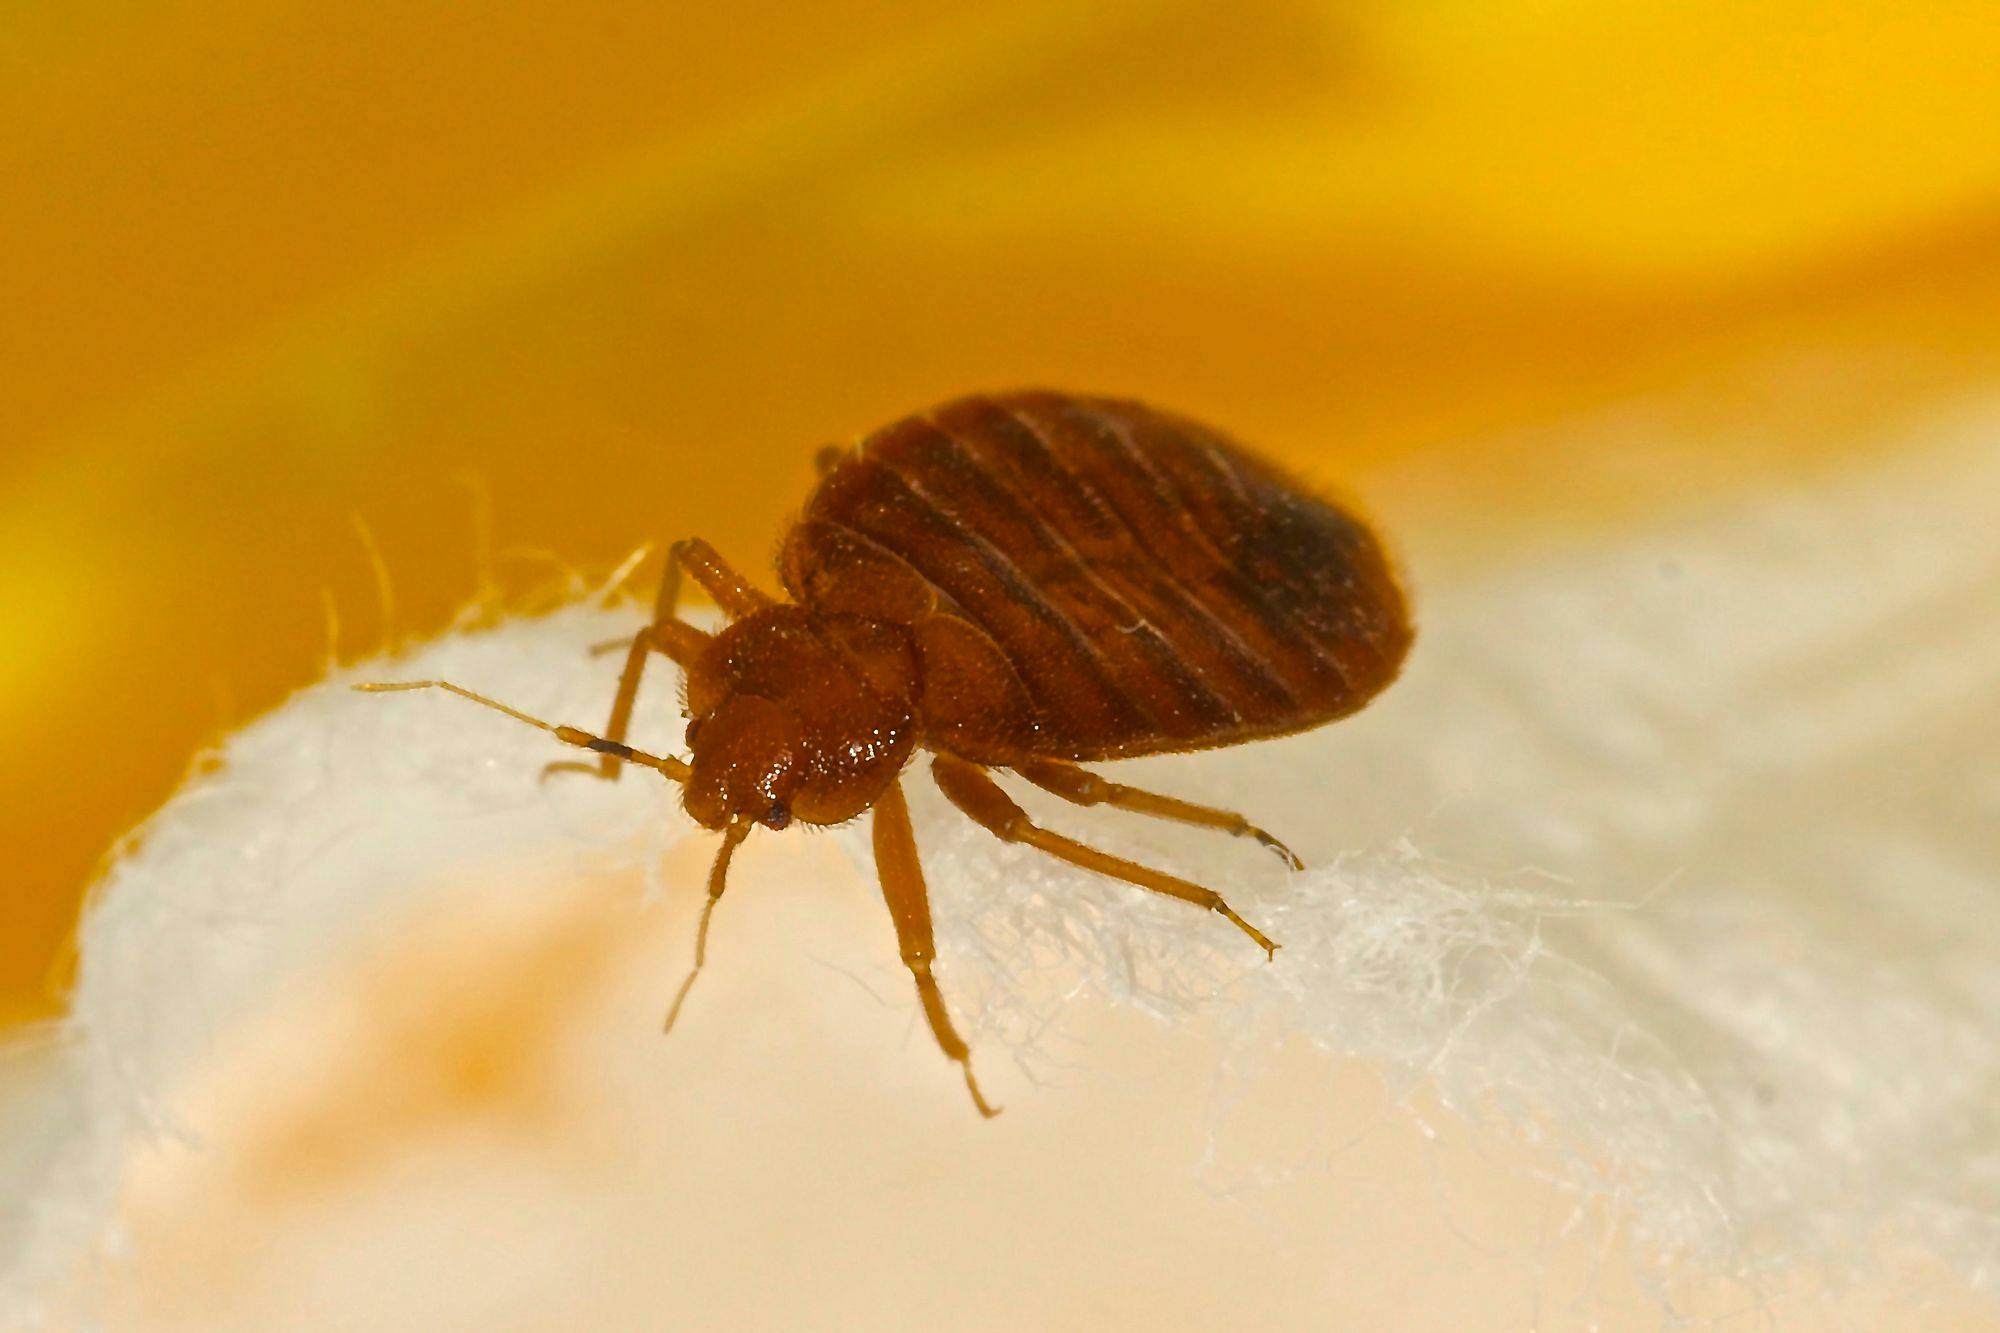 Uncover the secrets to bed bug control with Empire Lawn & Pest Control. Our expert guide reveals effective solutions to safeguard your home.